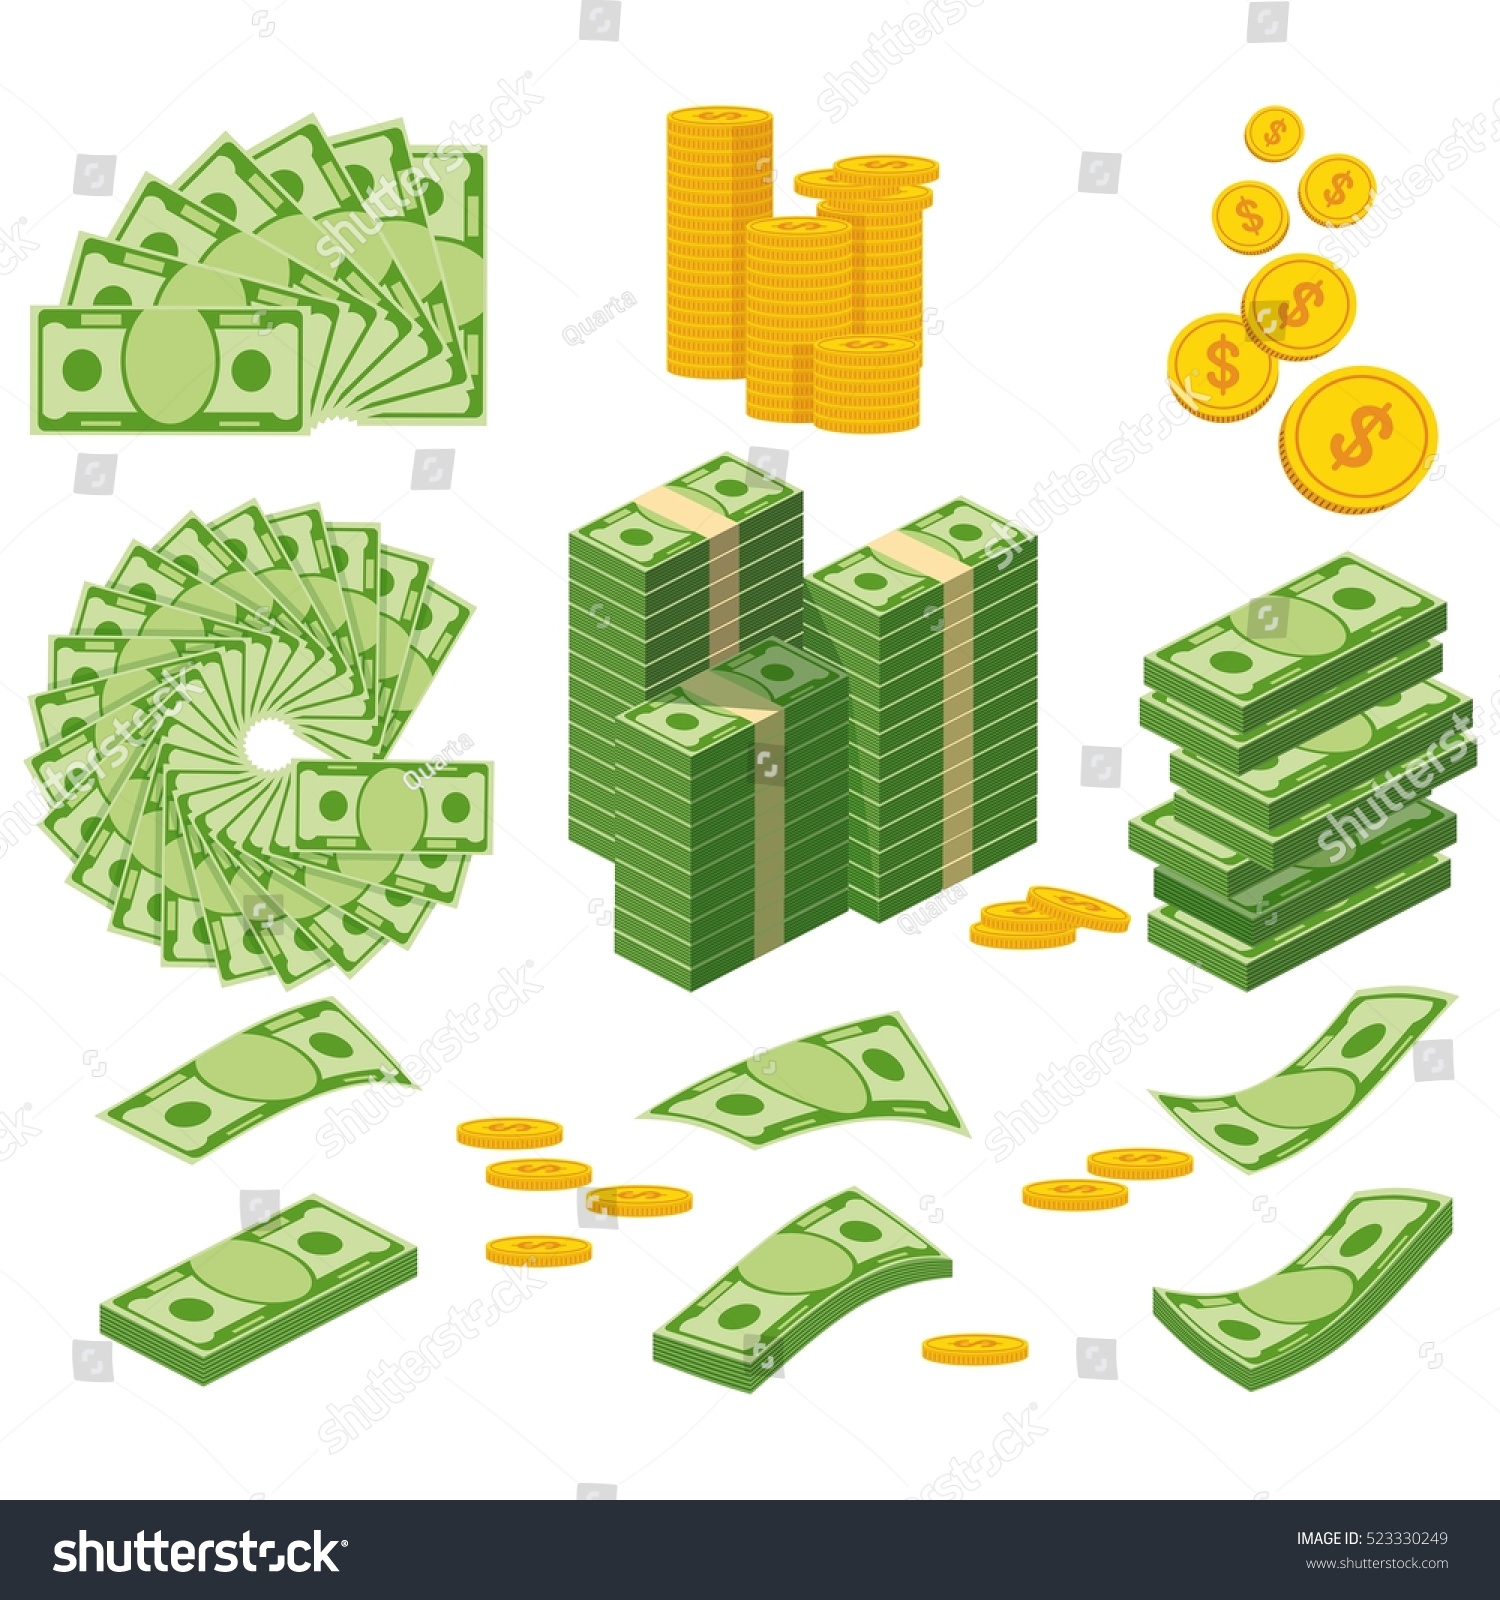 Set a various kind of money. Packing in bundles of bank notes, bills fly, gold coins. Flat vector cartoon money illustration. Objects isolated on a white background. #523330249